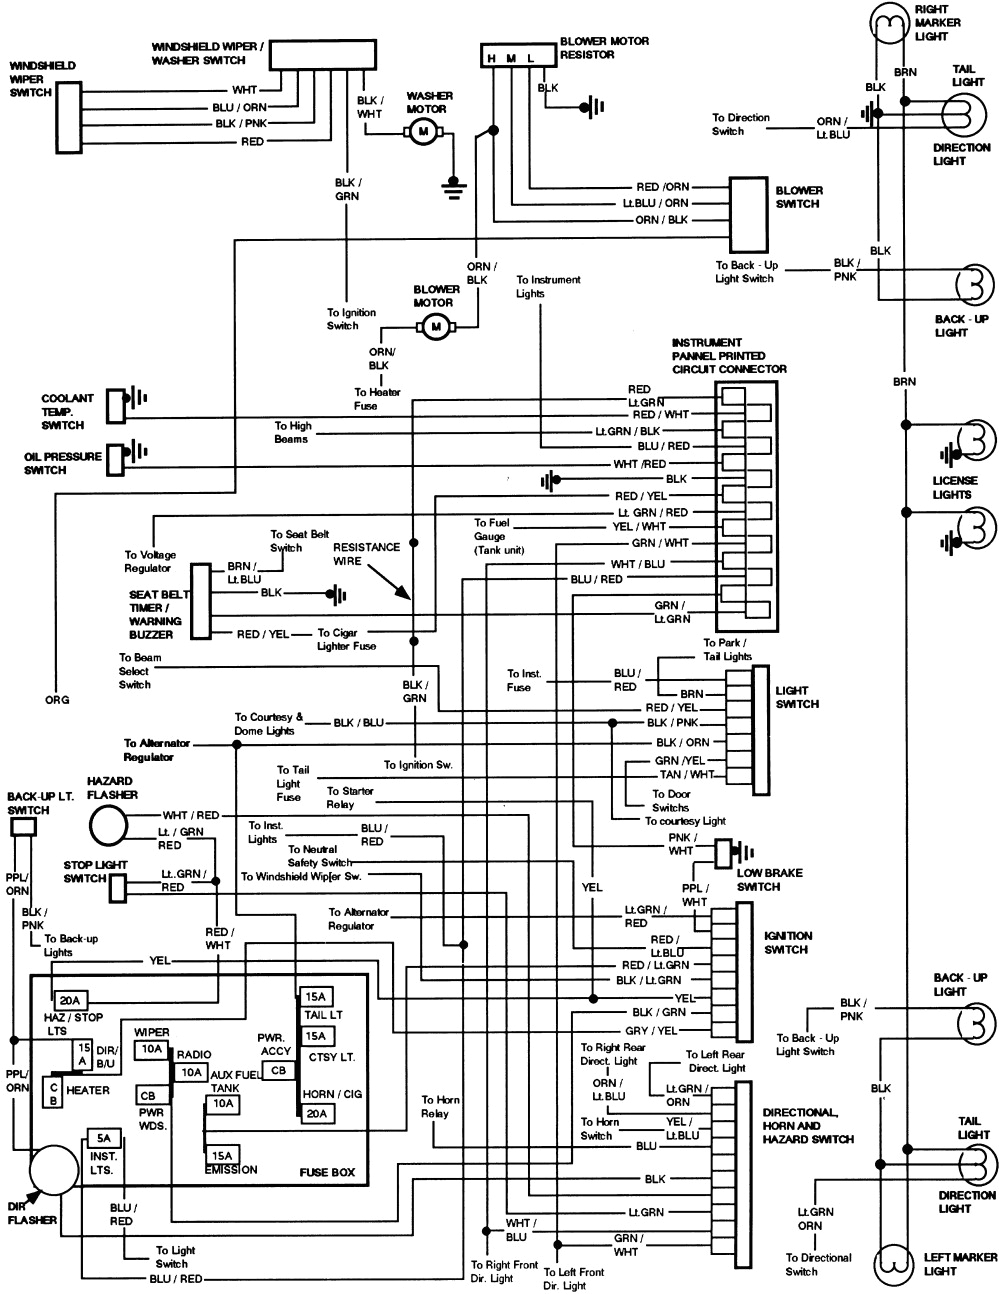 ford e 150 ignition wiring diagram wiring diagram blog x 1996 ford ignition switch diagram